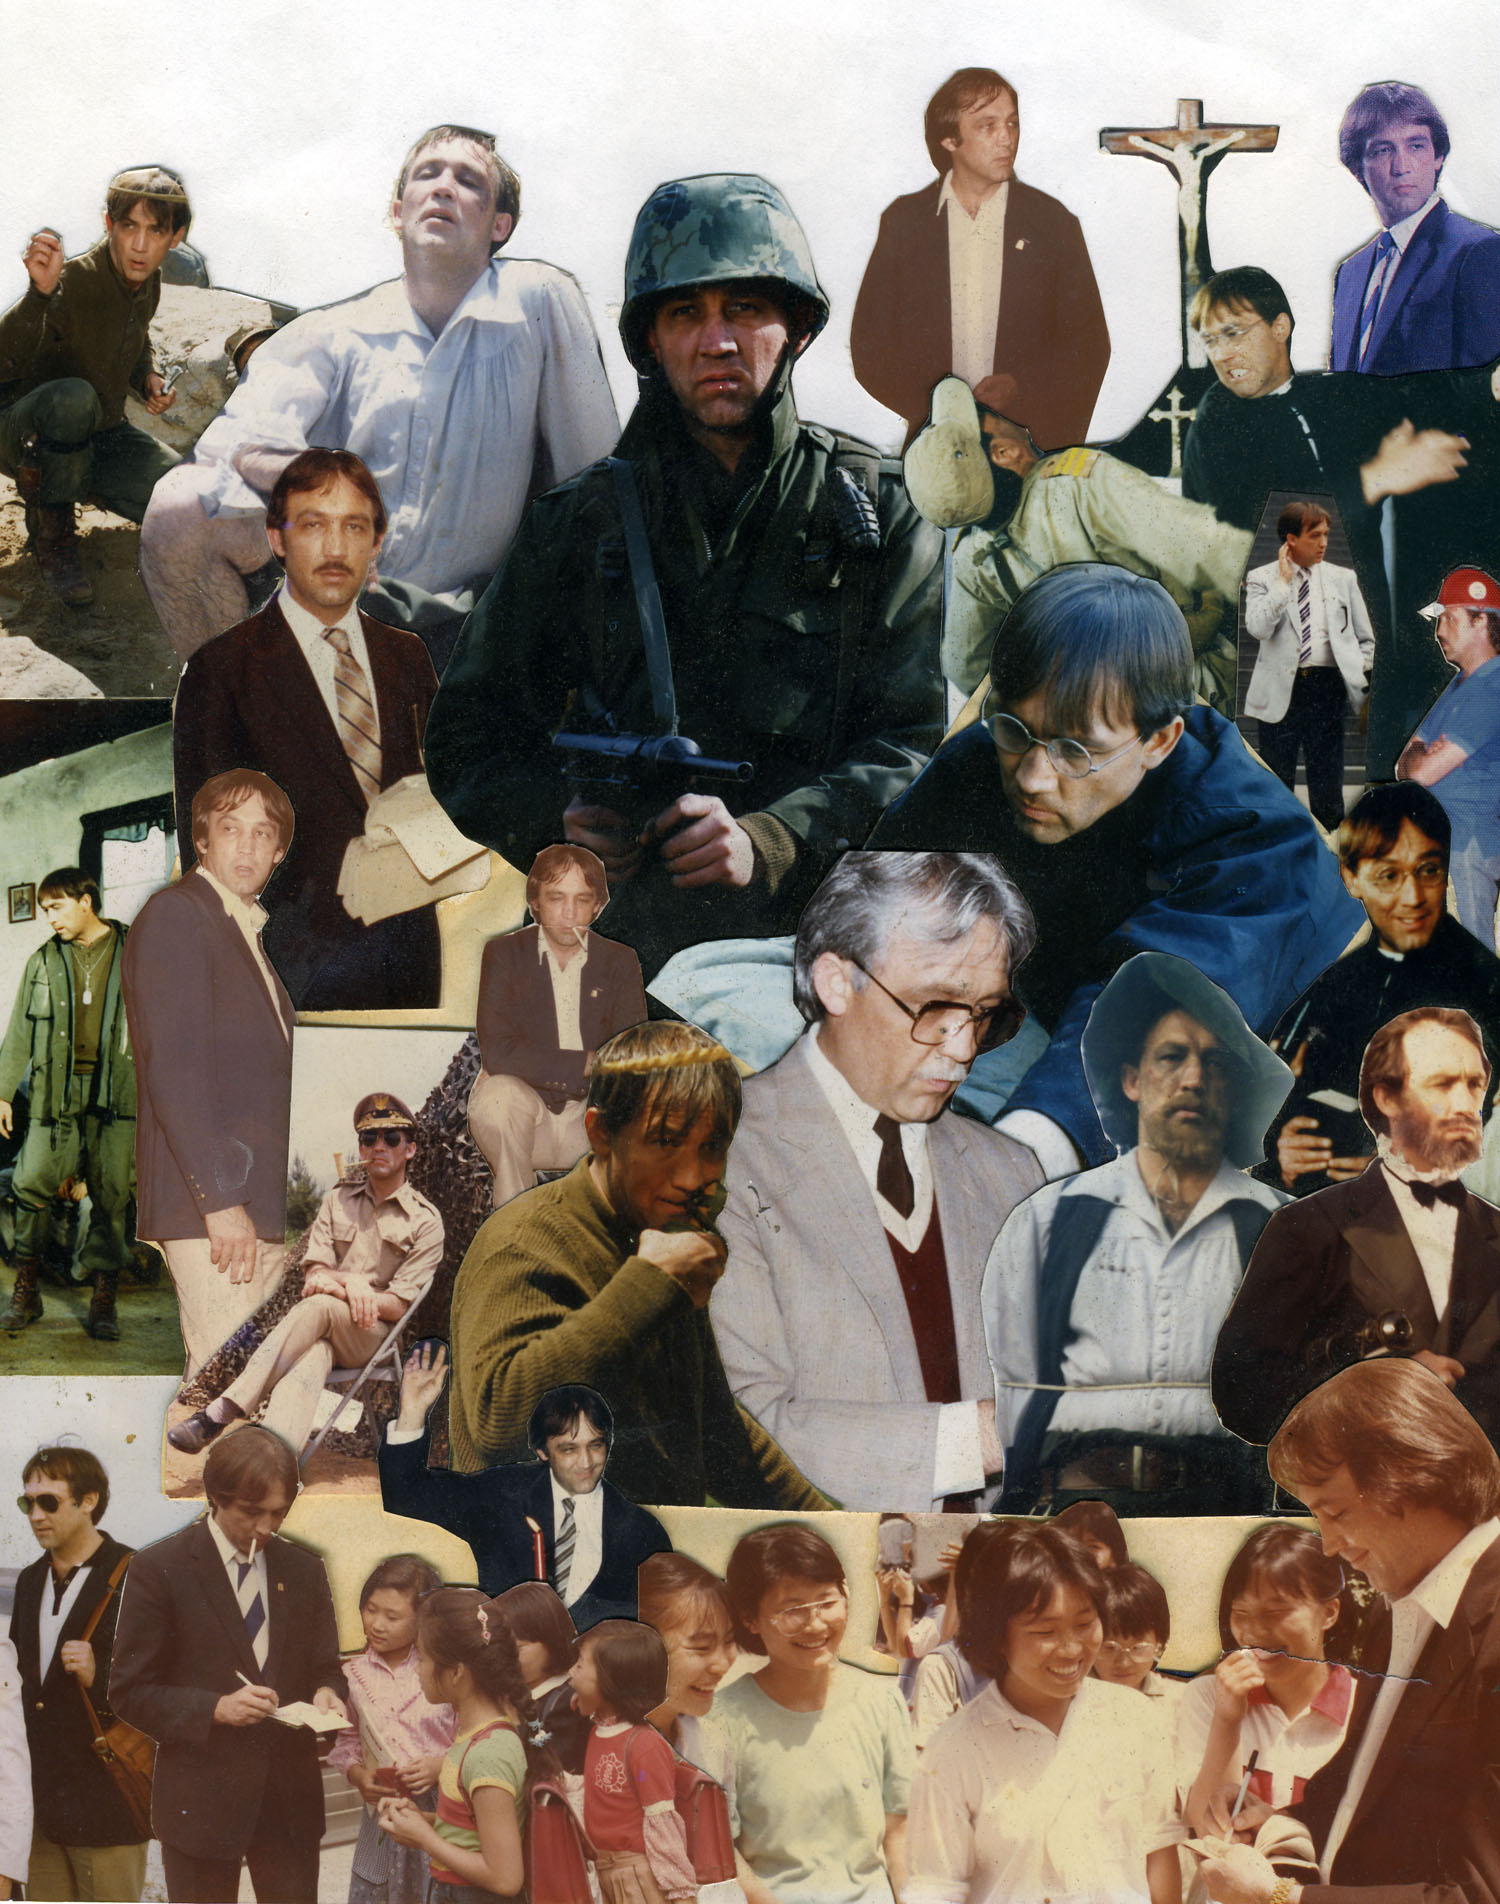 Montage of Dennis Christen's roles from 1981 to Present.